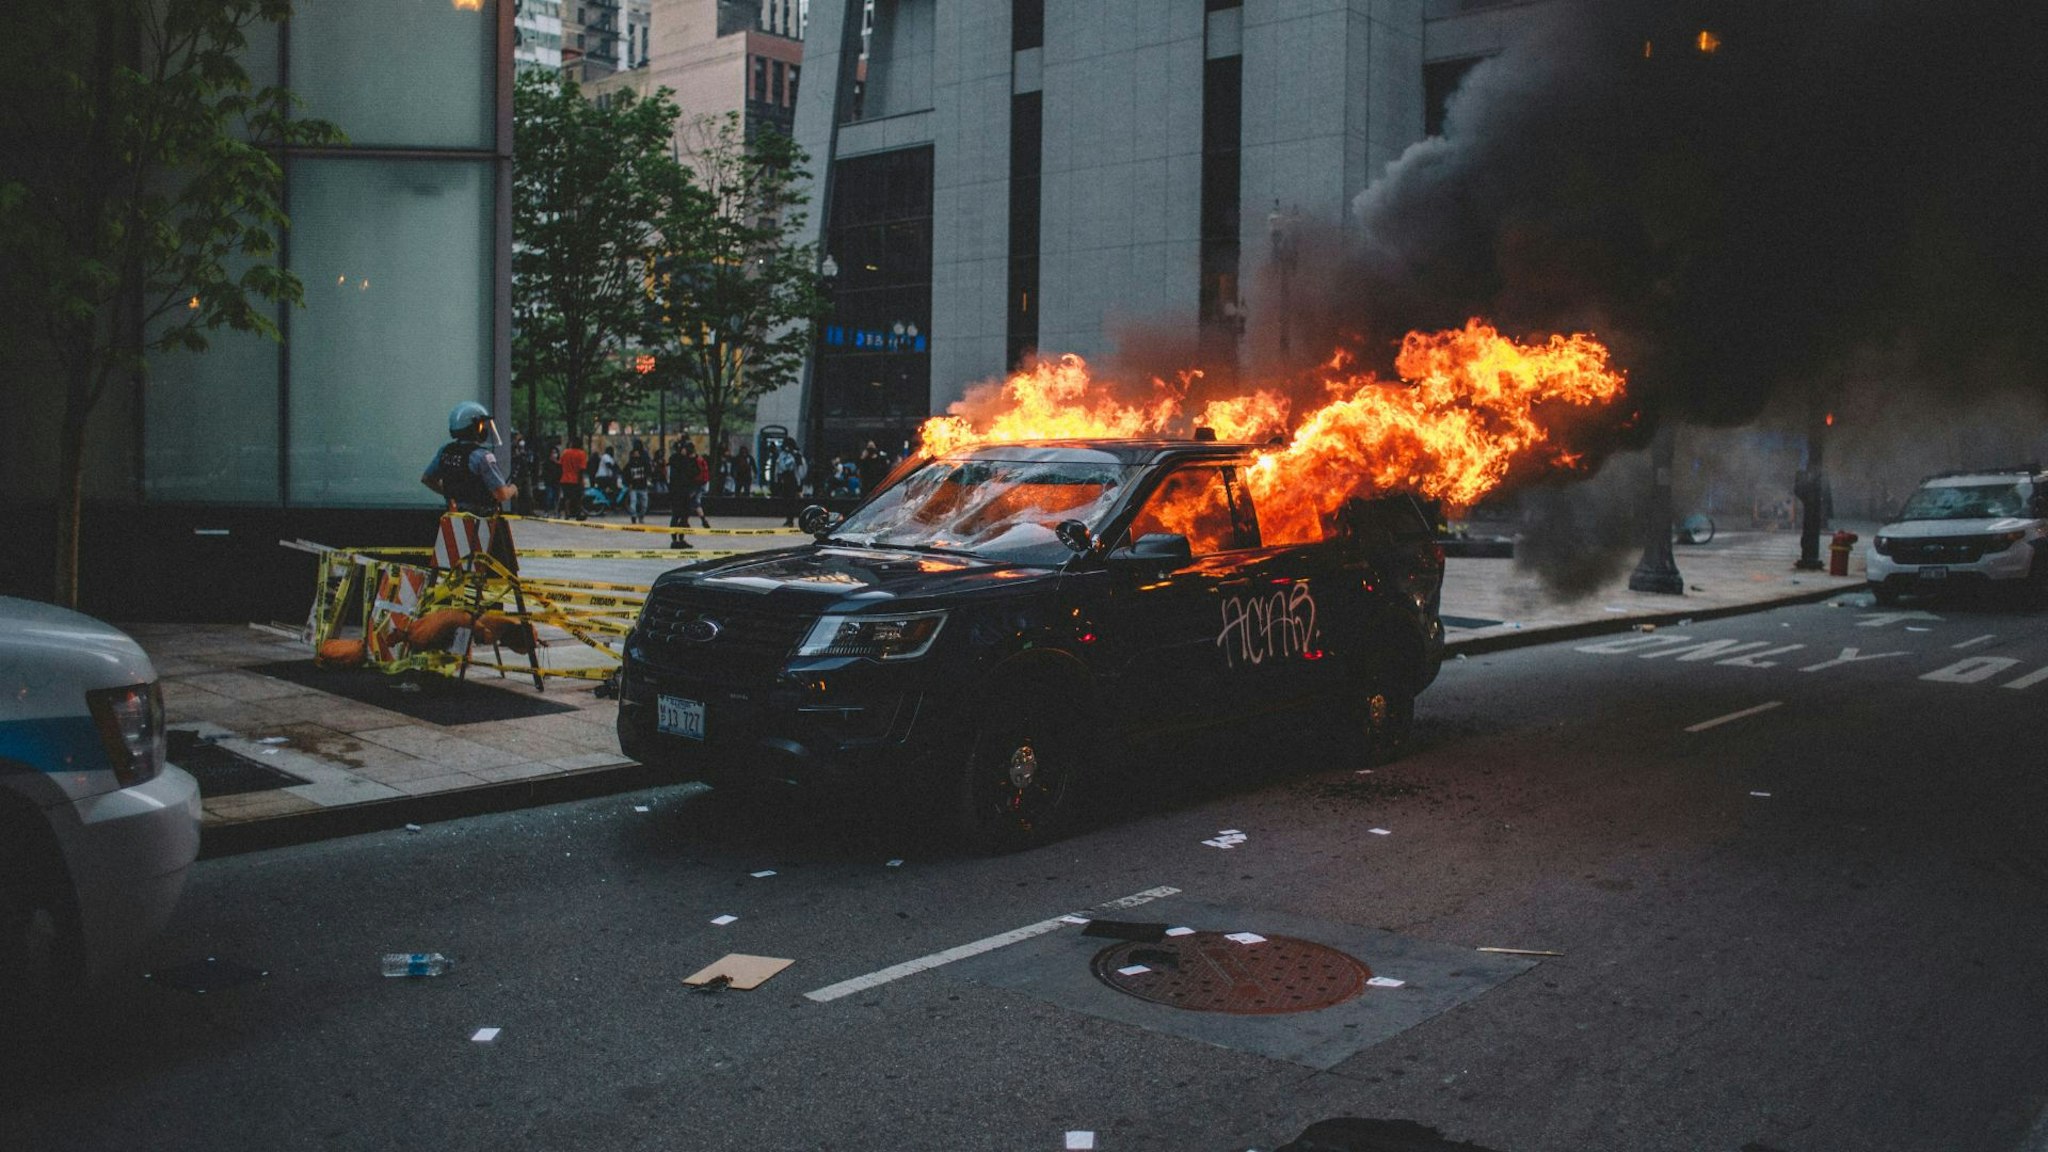 Protesters set fire to a police vehicle , on May 30, 2020 during a protest against the death of George Floyd, an unarmed black man who died while while being arrested and pinned to the ground by the knee of a Minneapolis police officer.